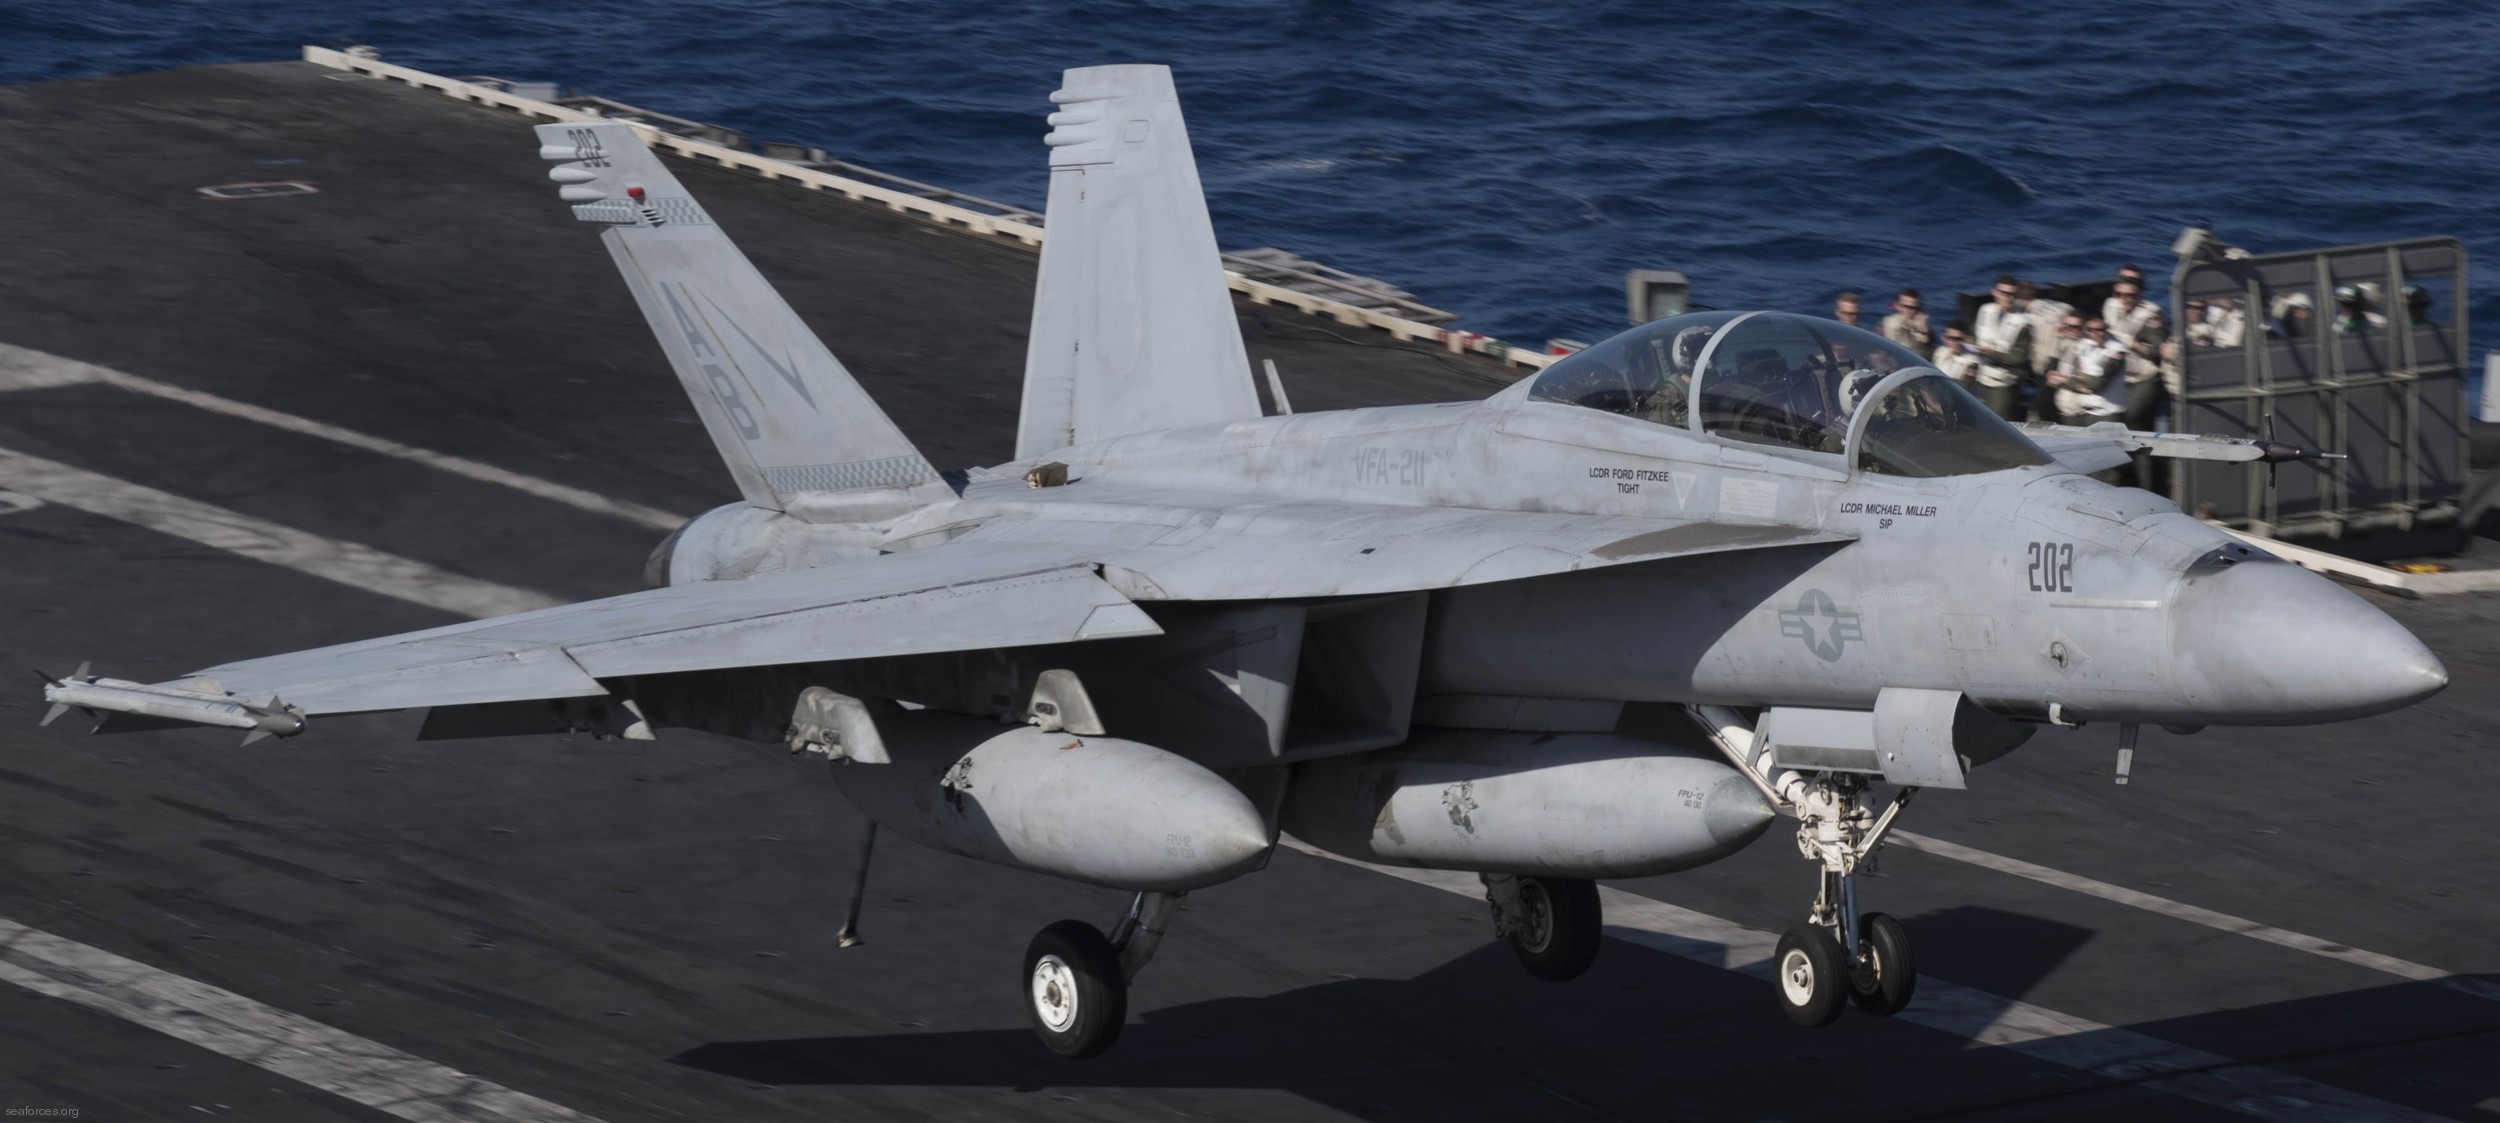 vfa-211 fighting checkmates strike fighter squadron f/a-18f super hornet navy carrier air wing cvw-1 uss harry s. truman cvn-75 33